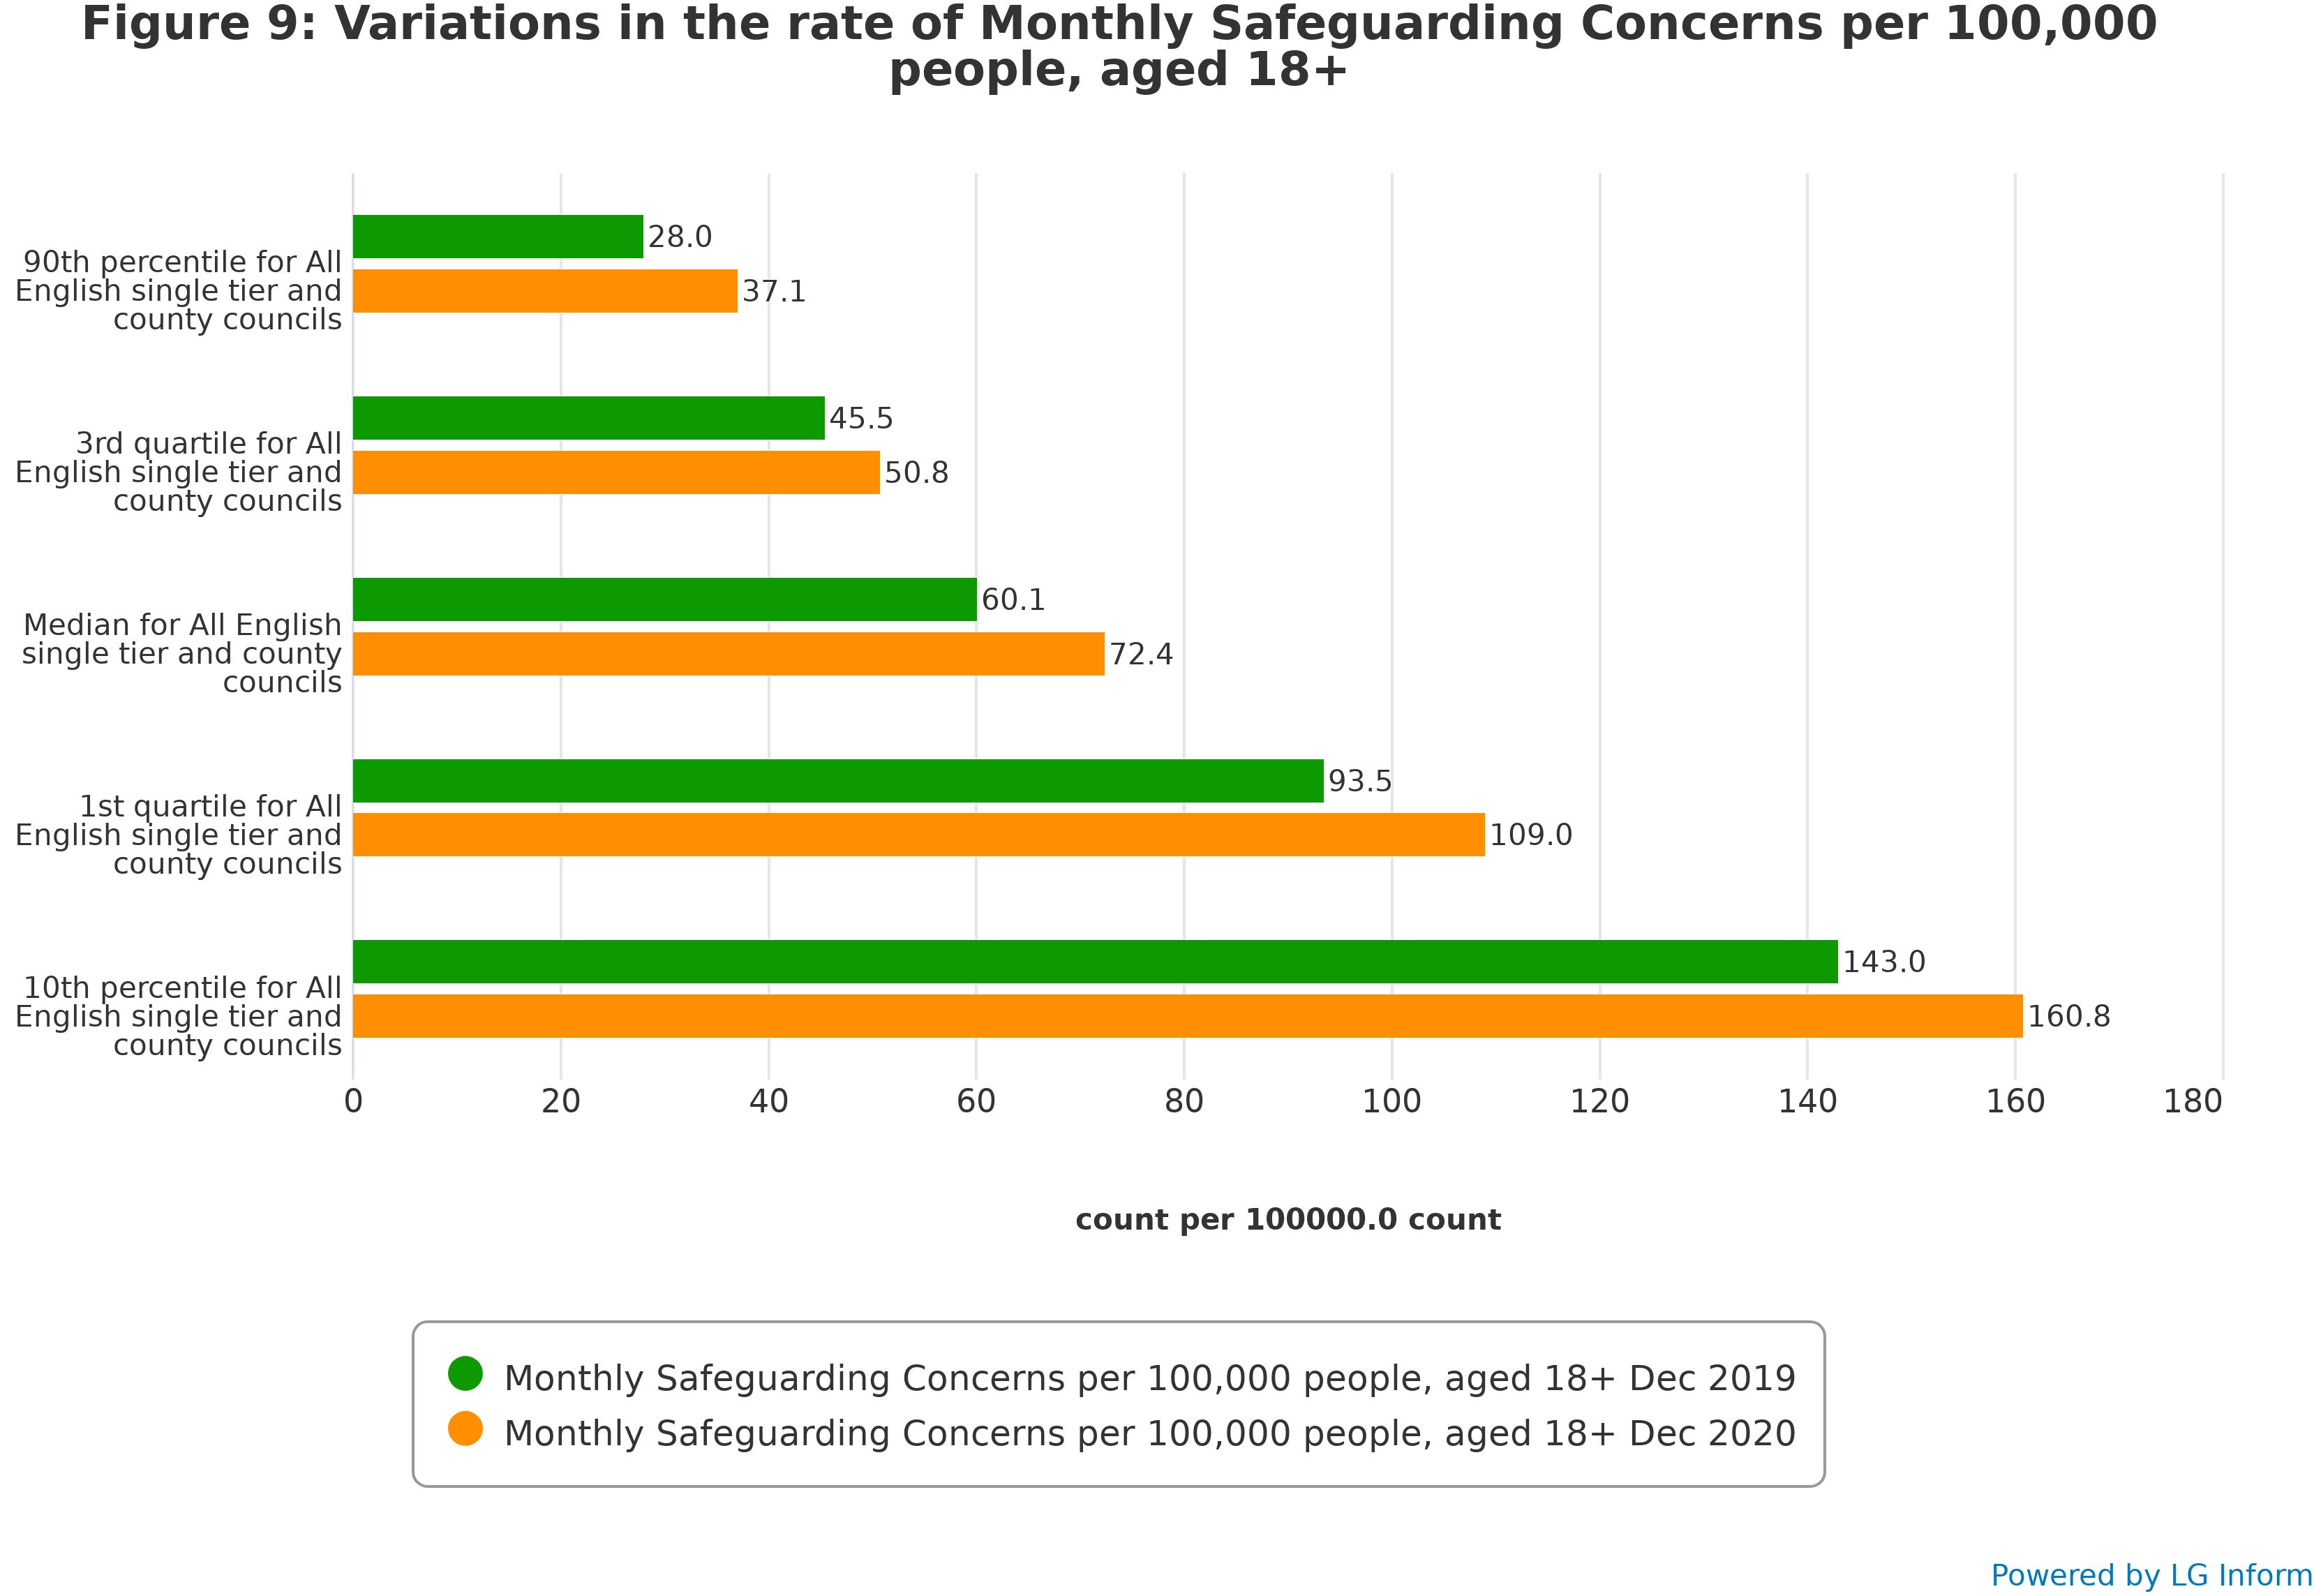 Figure 9: Variations in the rate of Monthly Safeguarding Concerns per 100,000 people, aged 18+